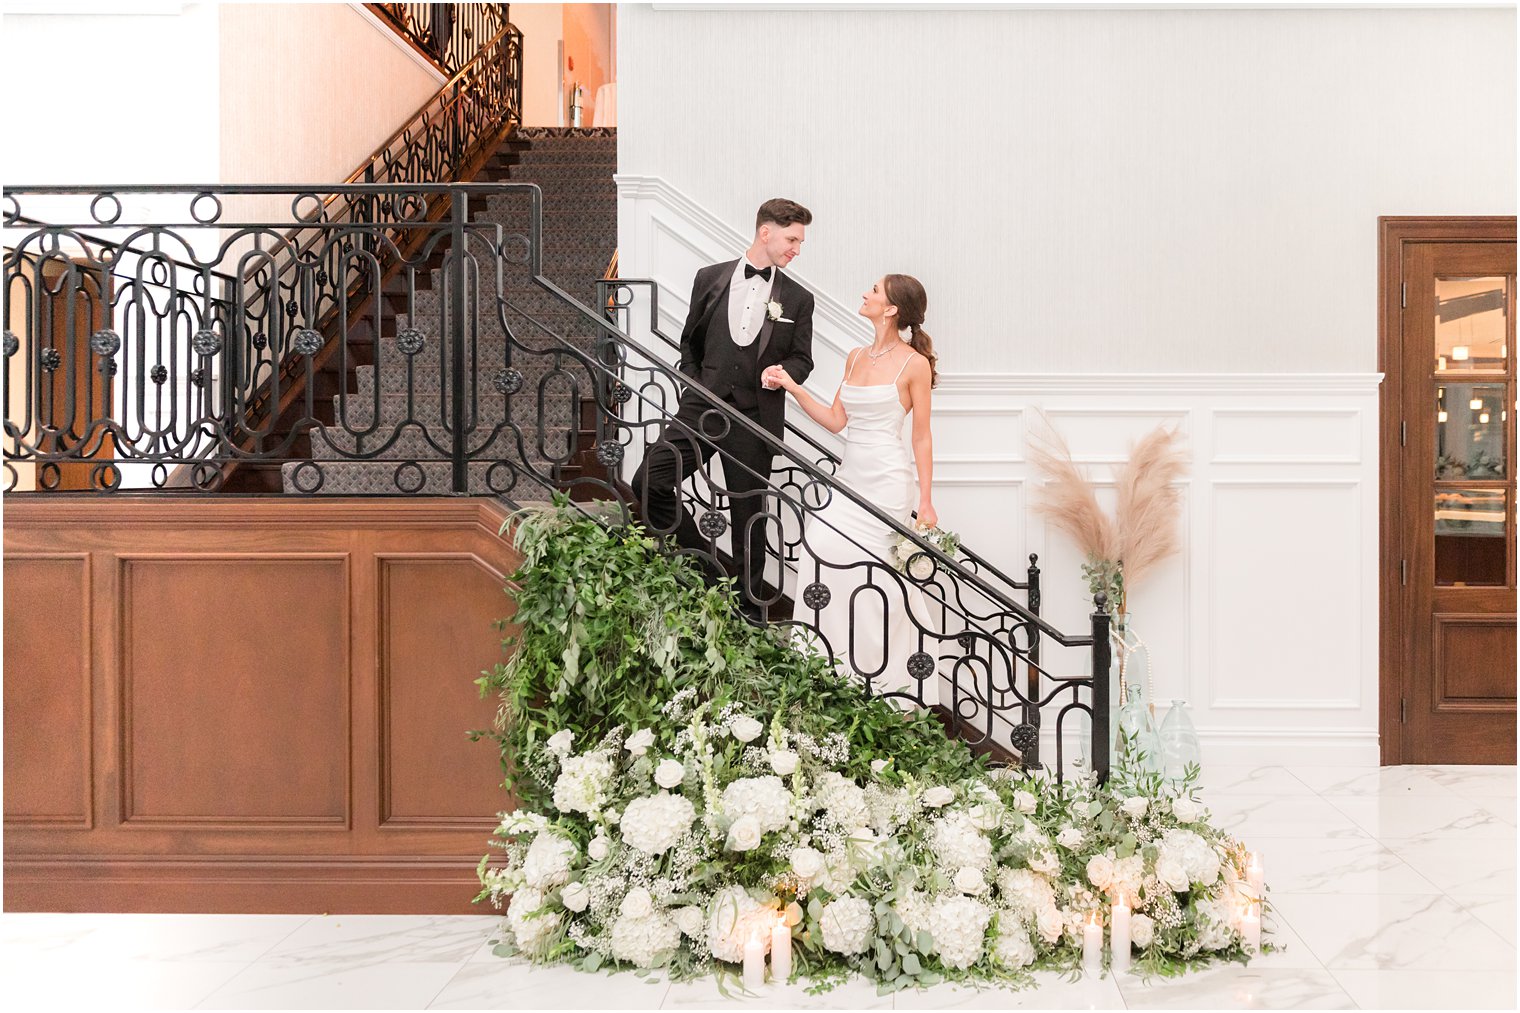 groom leads bride up stairs with white and green floral display 